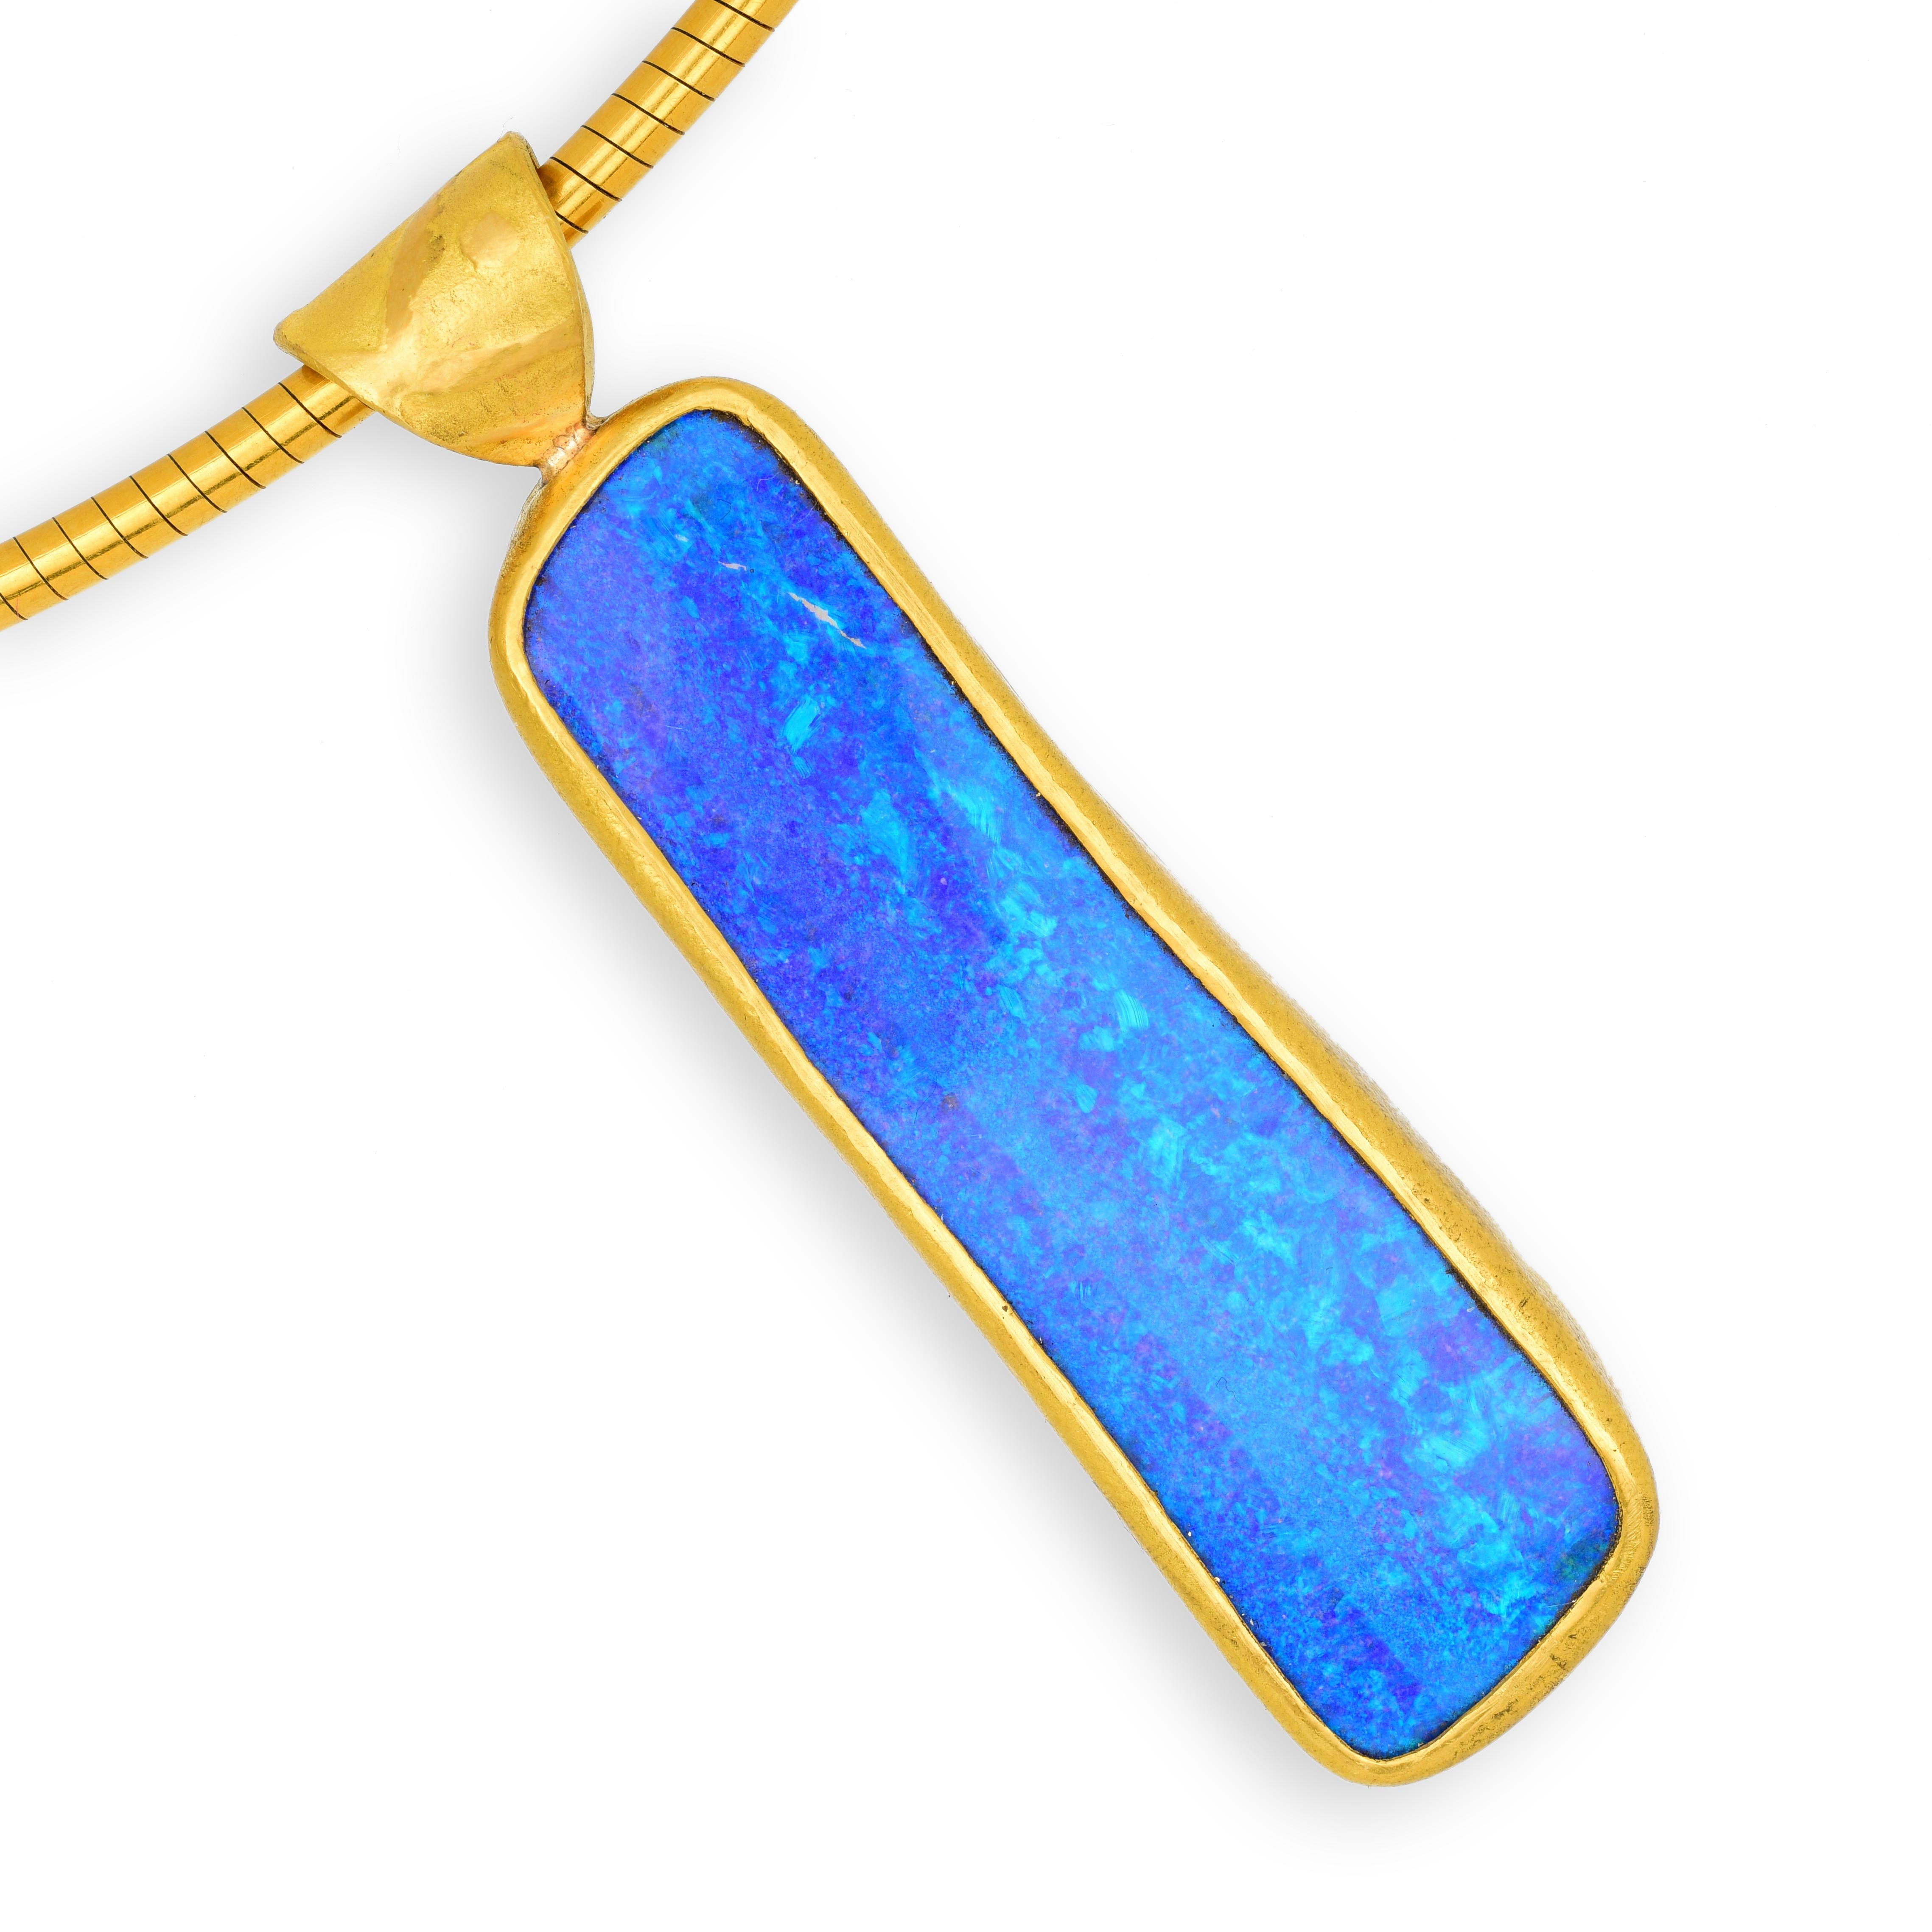 This astonishing solid boulder opal has ultramarine colours that conjure images of the ocean. It is framed with rich and plentiful 22 karat gold. It is a total show-stopper; I cannot over-emphasise the vivid beauty of this piece.

Chain is 42cm and